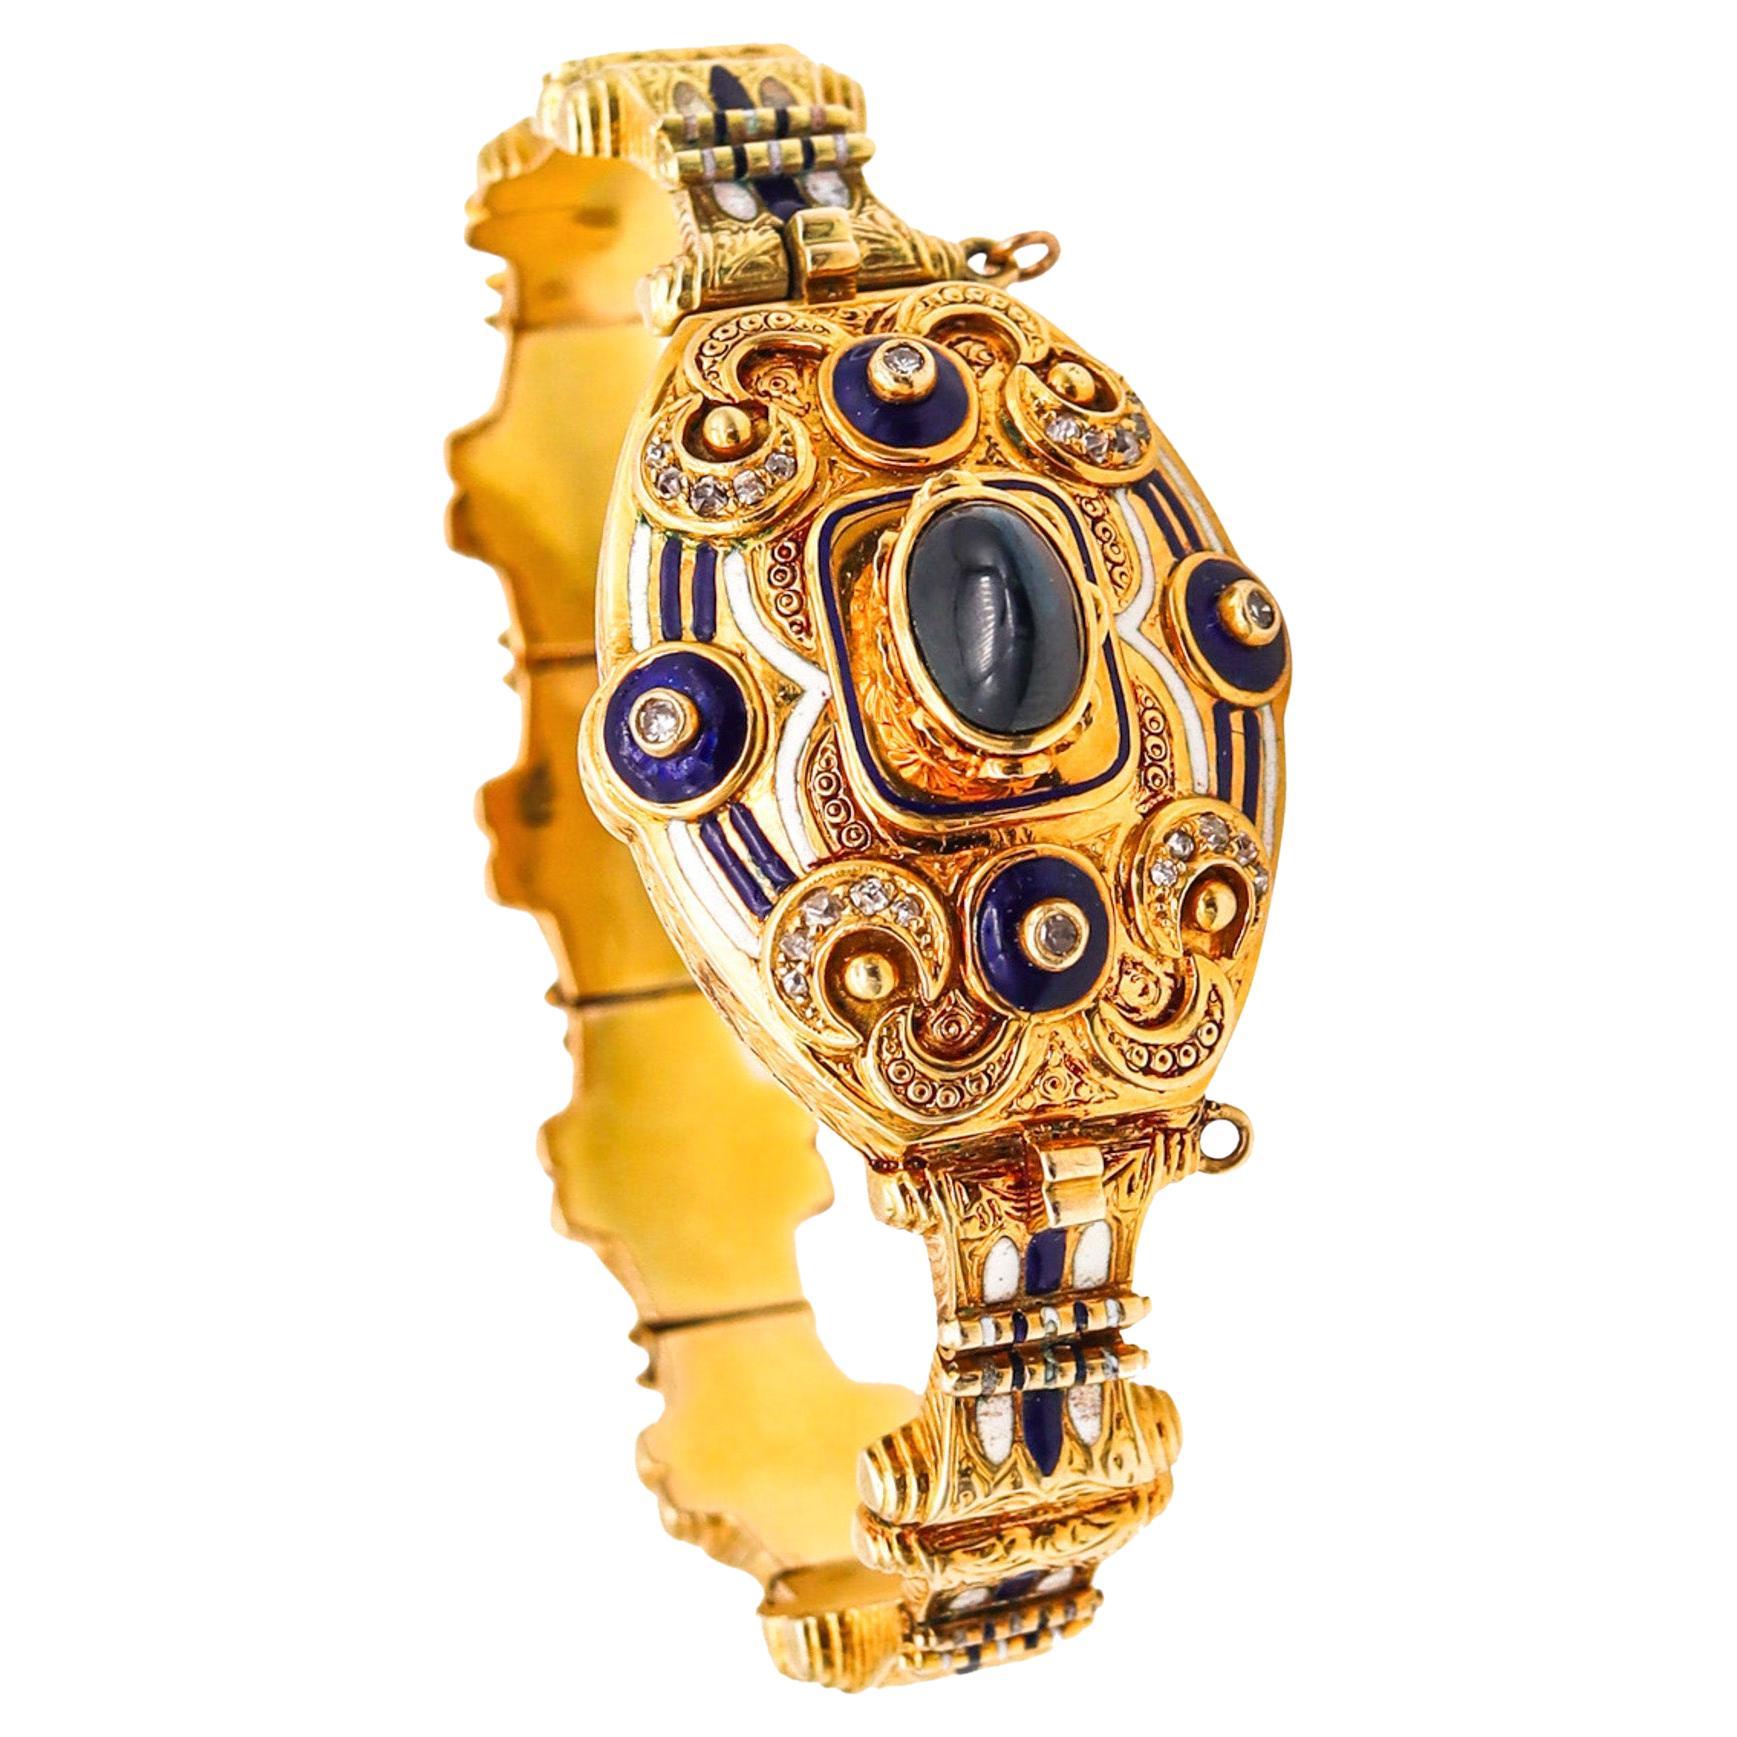 Edwardian 1900 Enameled Bracelet In 18Kt Yellow Gold With Sapphires And Diamonds For Sale